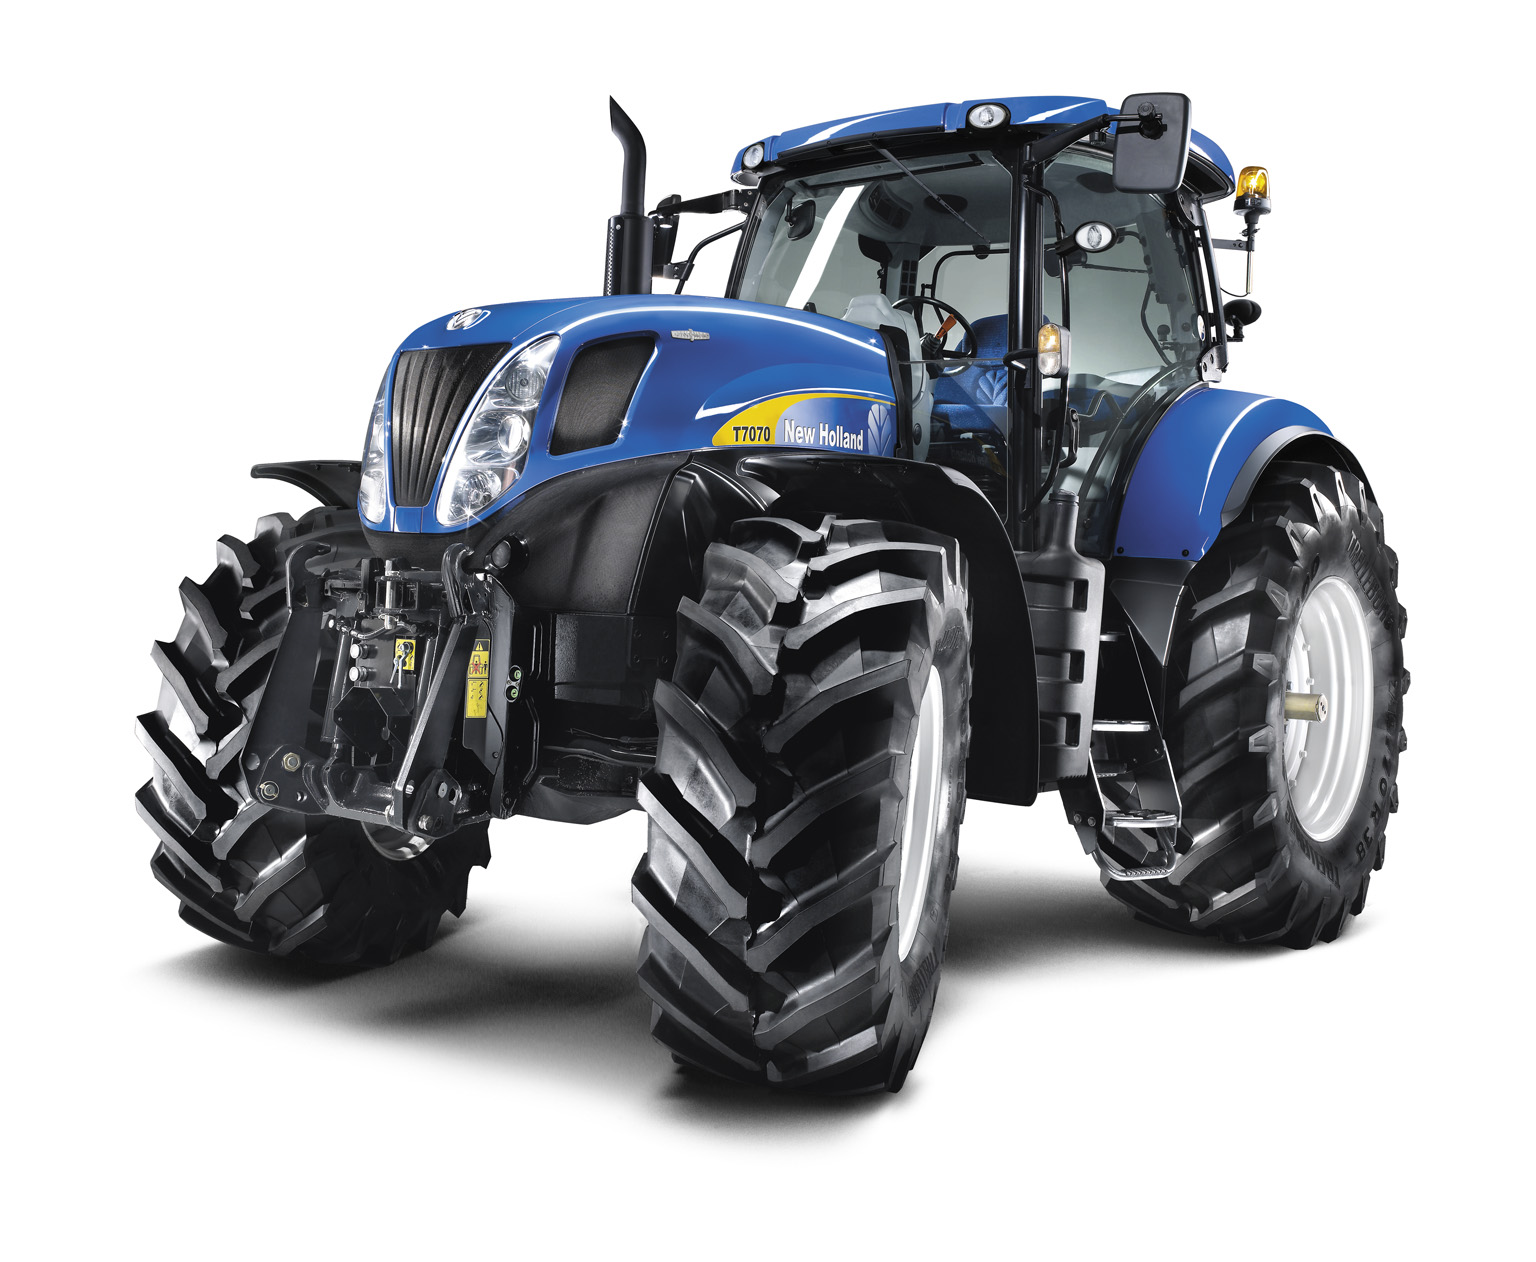 New holland t. New Holland t7060. Трактор Нью Холланд т7060. New Holland трактор 7060. Трактор New Holland t6070.